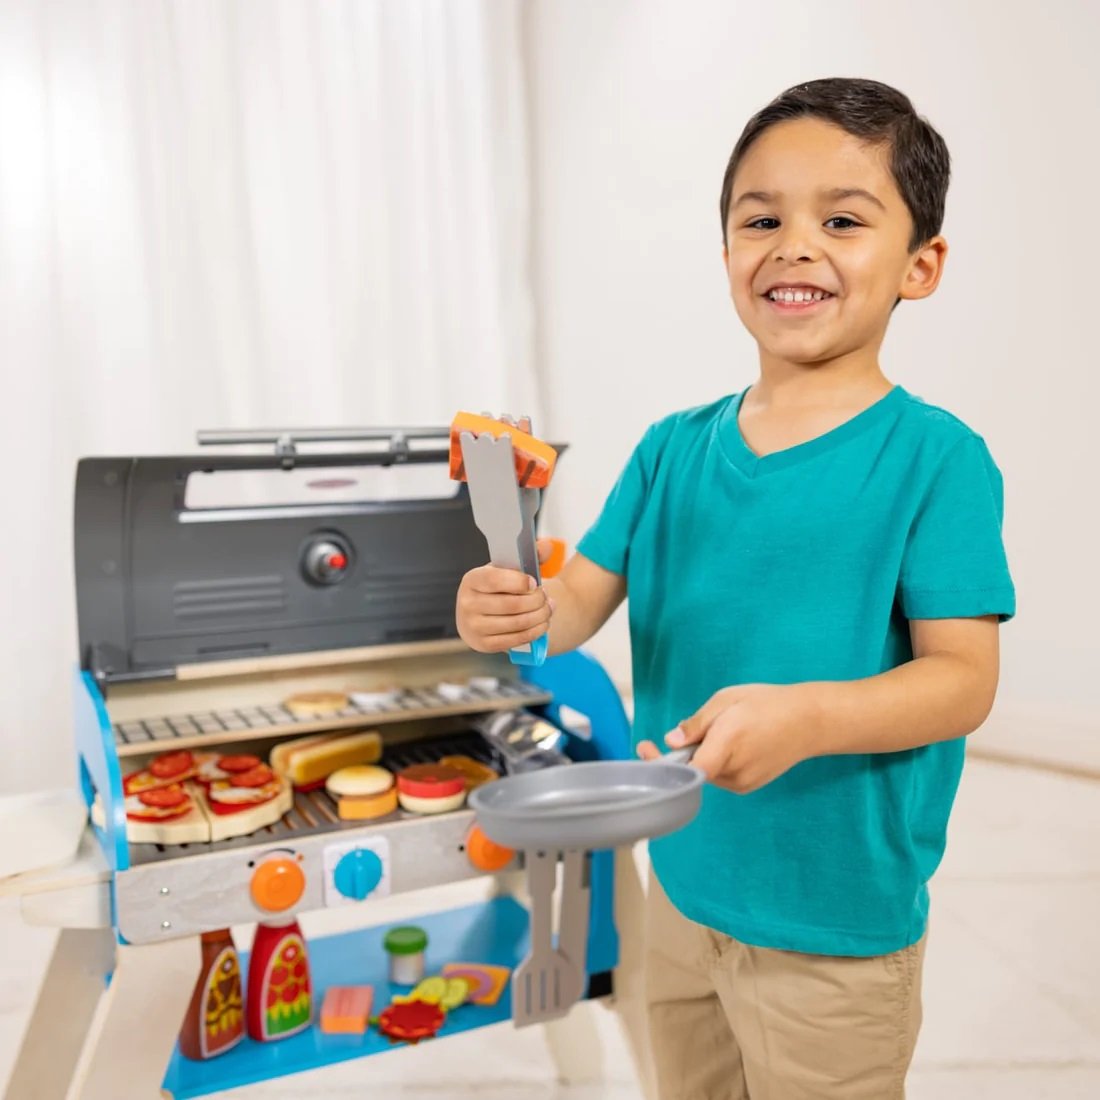 Melissa & Doug Deluxe Grill & Pizza Oven Playset